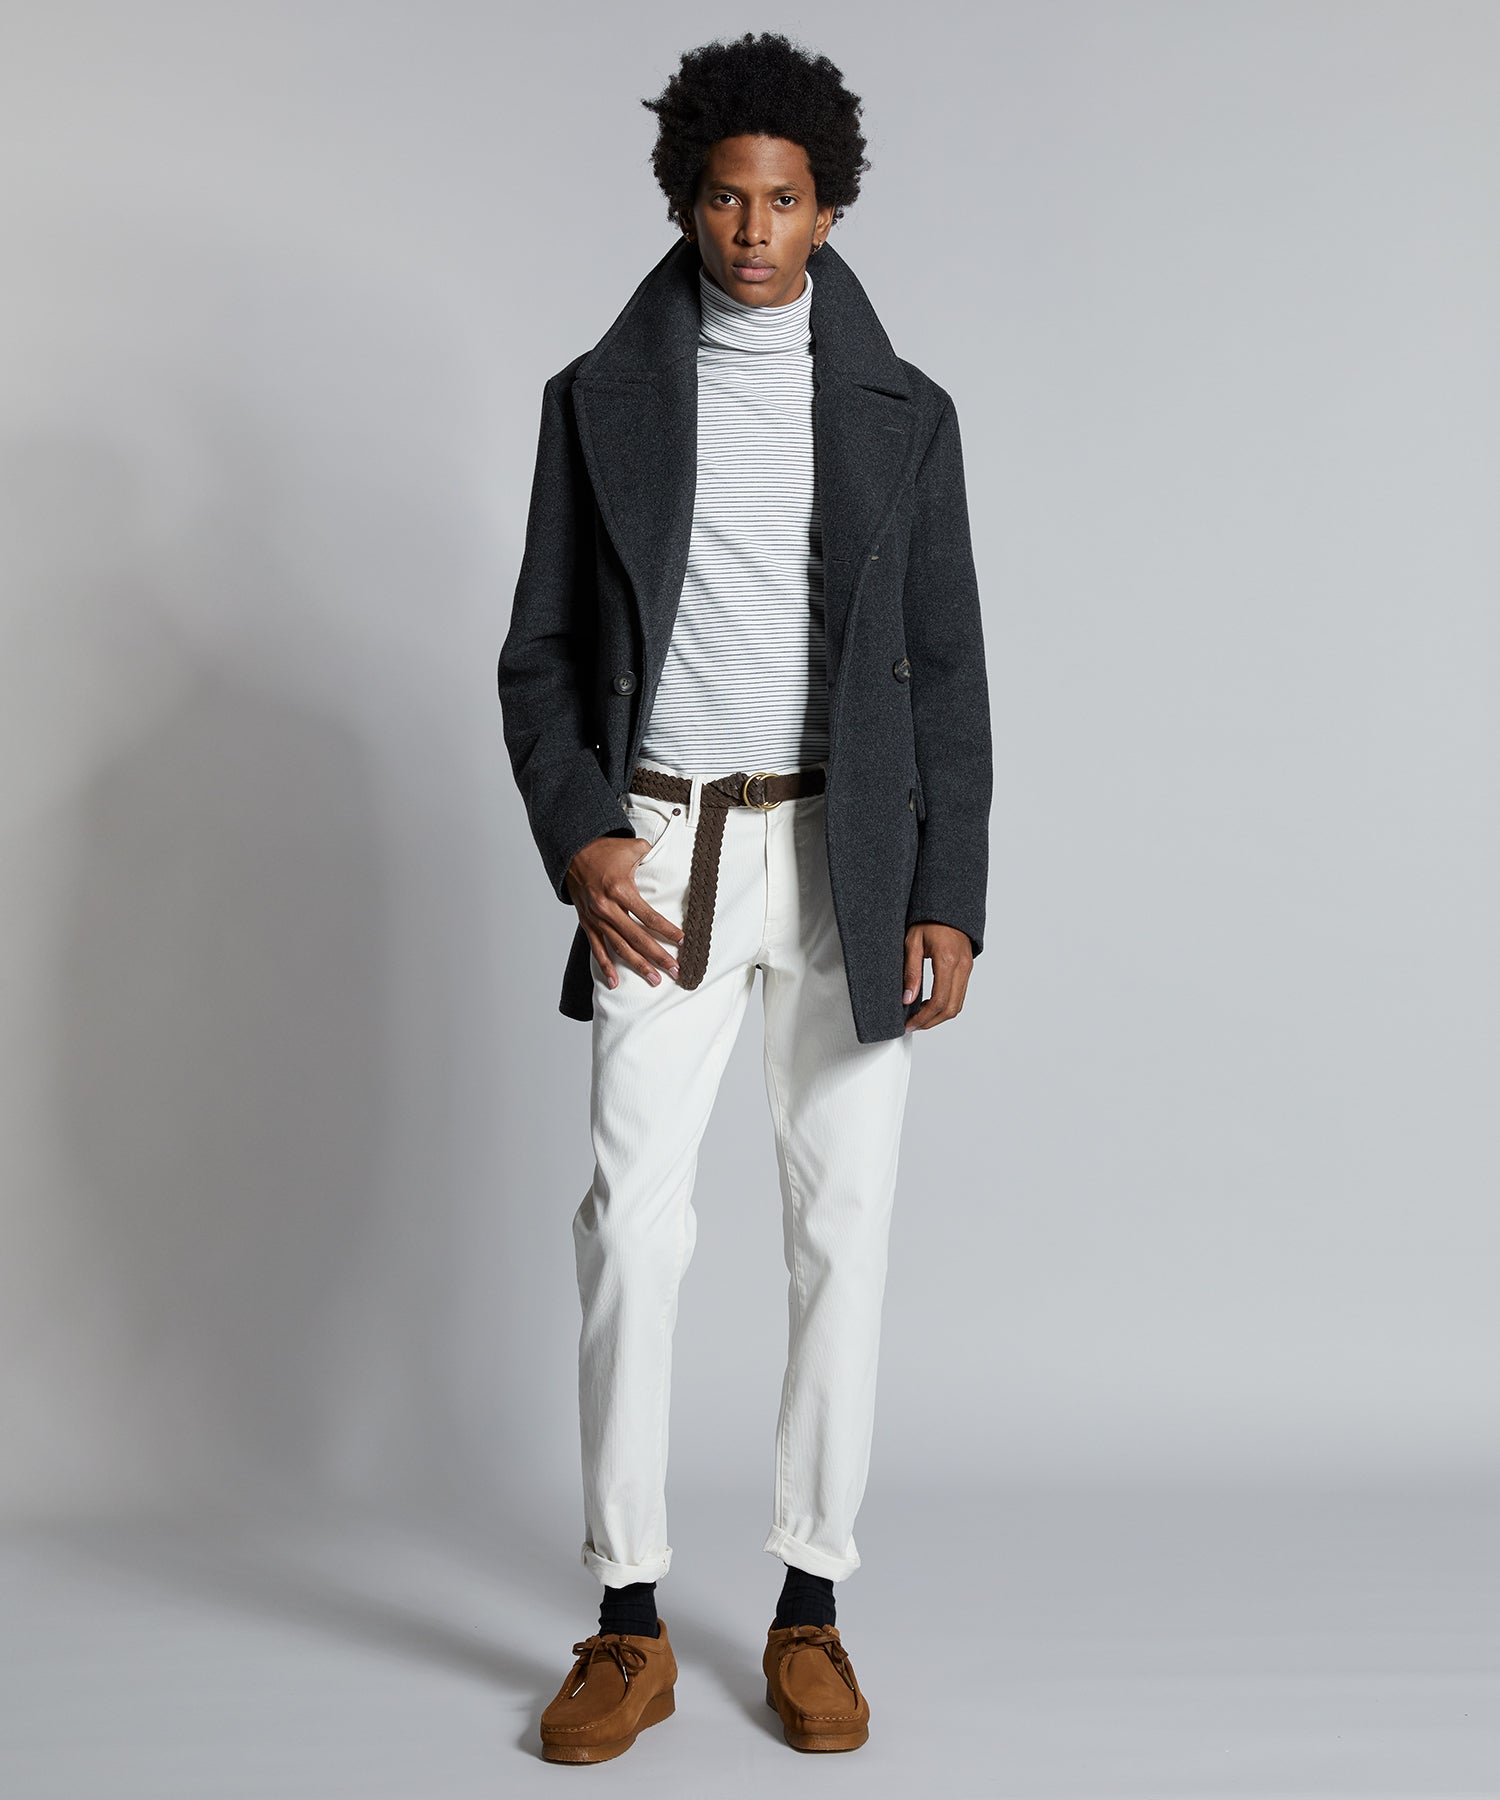 Todd Snyder + Private White Manchester Wool Cashmere Peacoat in Charco